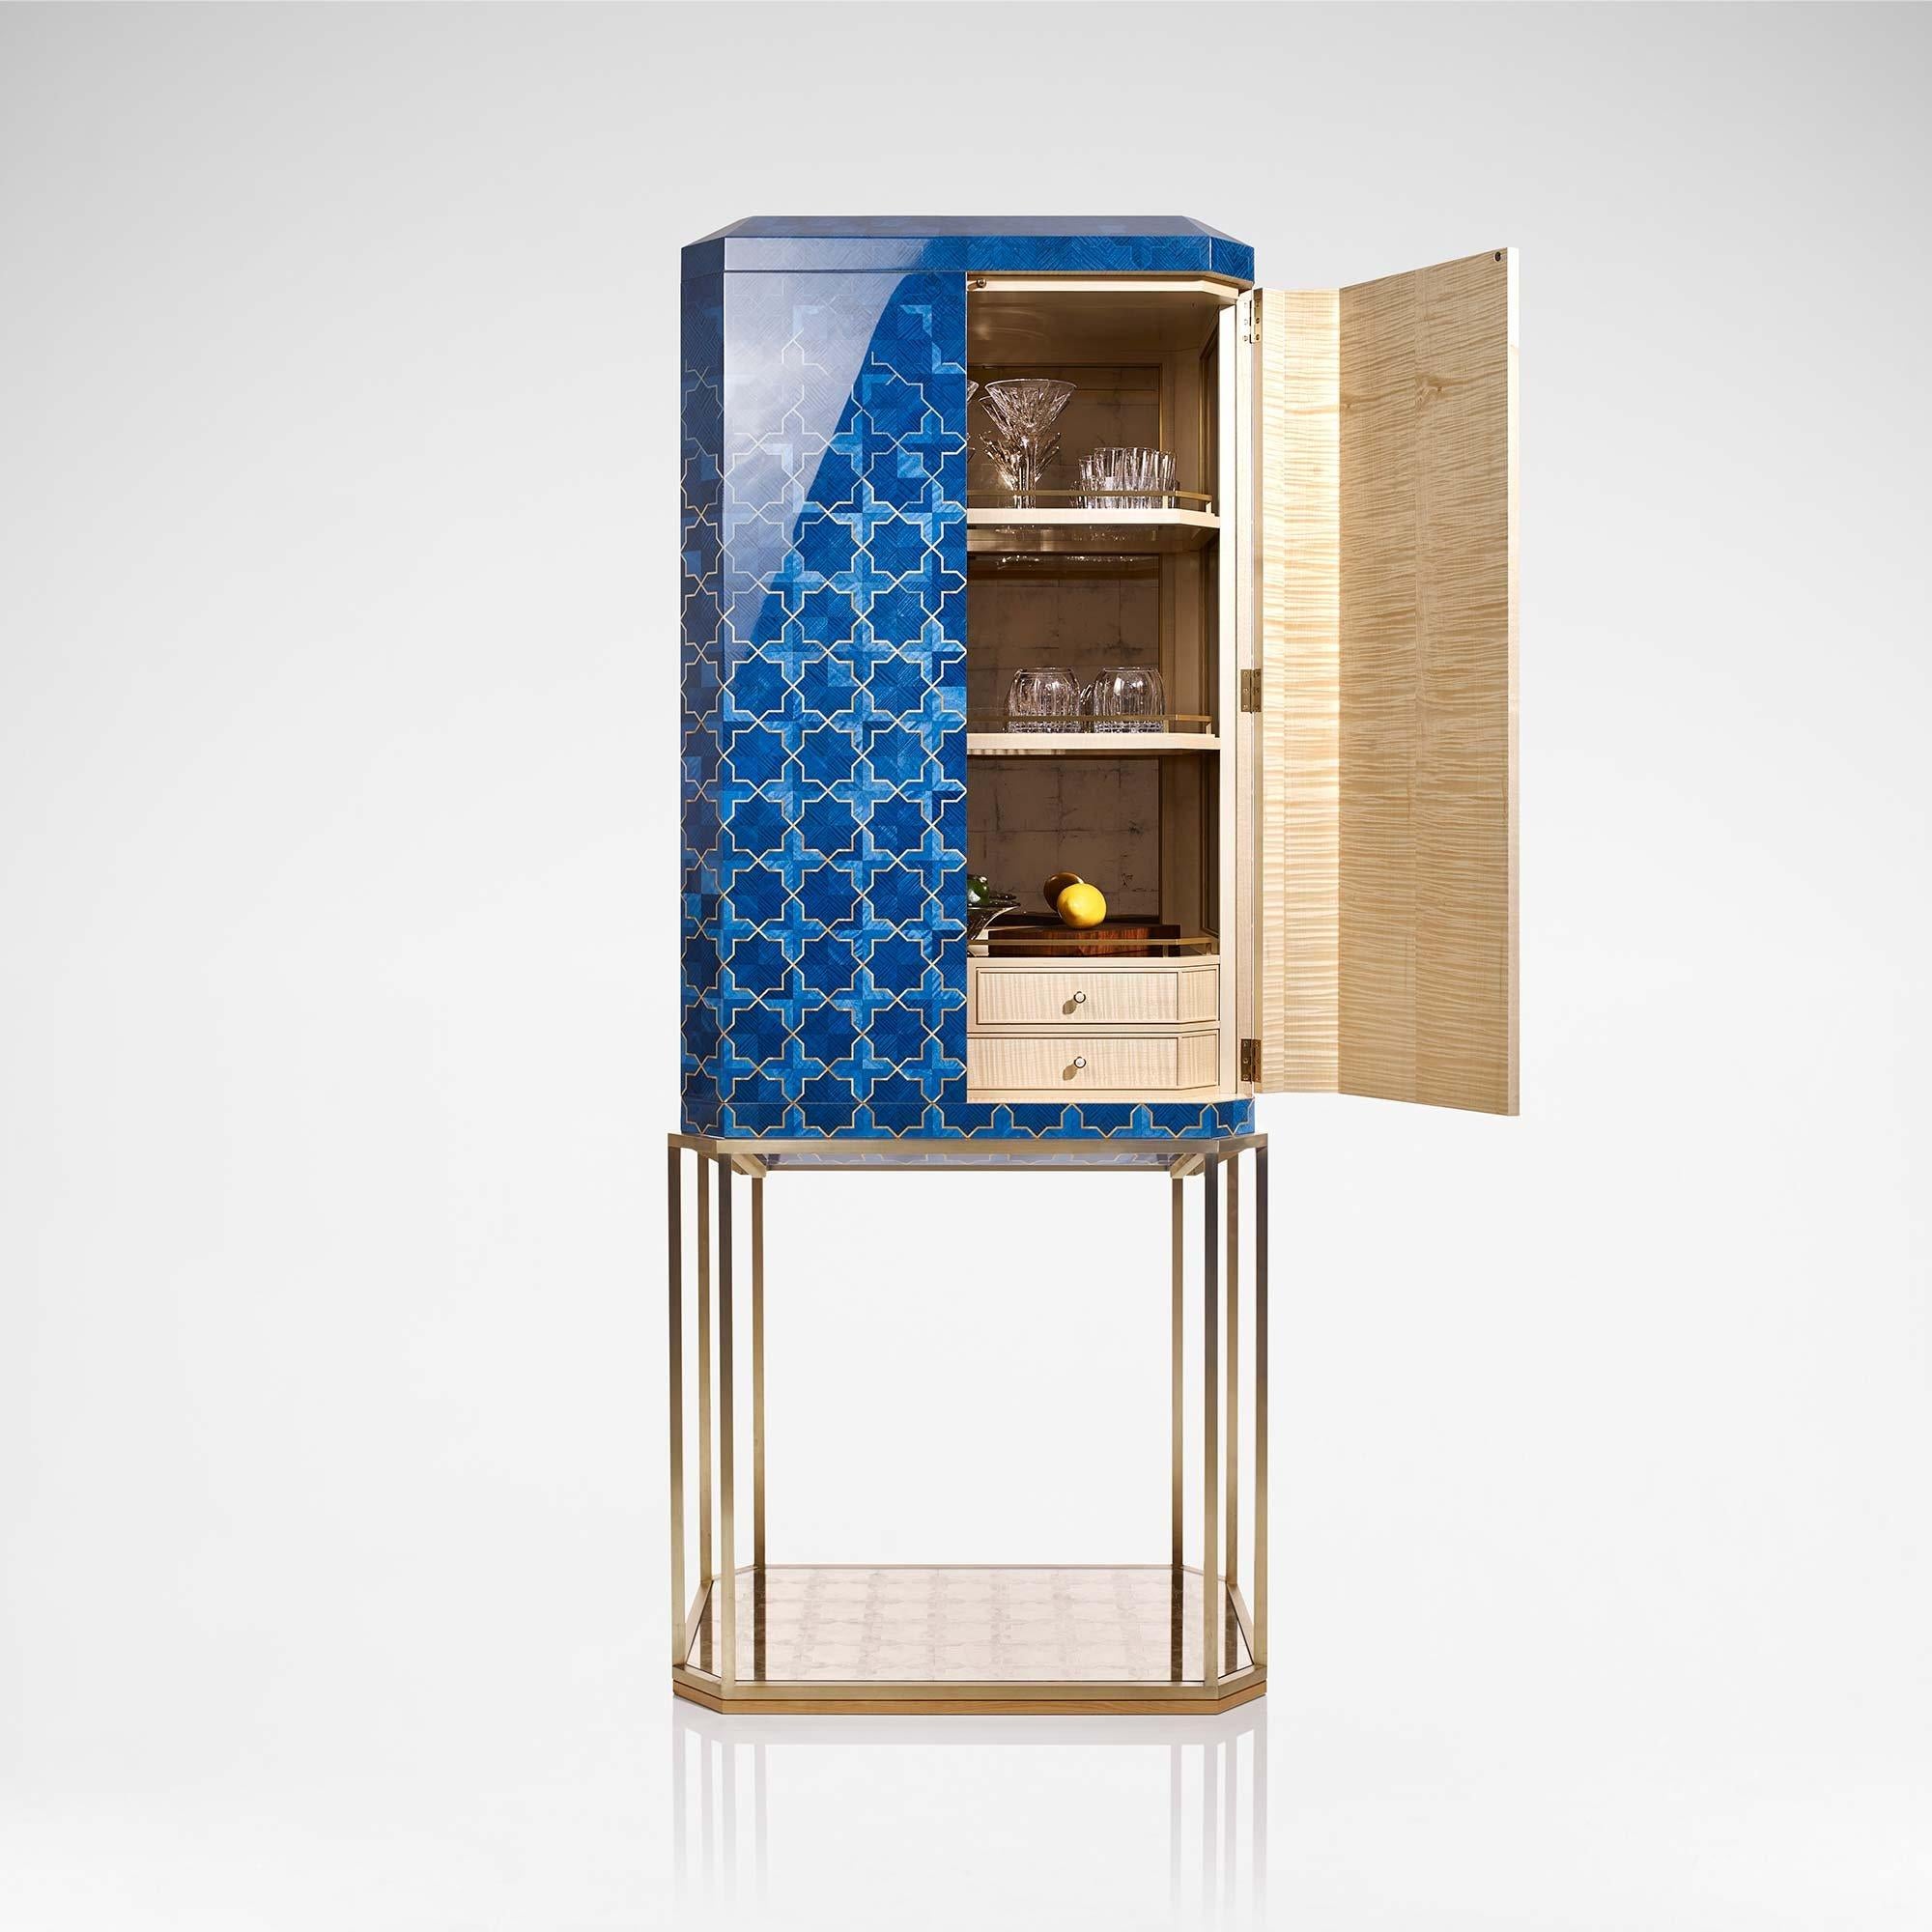 The Girih cabinet explores Islamic pattern through detailed wooden marquetry in brilliant sapphire blue and rich gold tones. The chest is cradled by a metal base crafted with a brushed brass finish with a glass eglomisé panel at the base.

At the